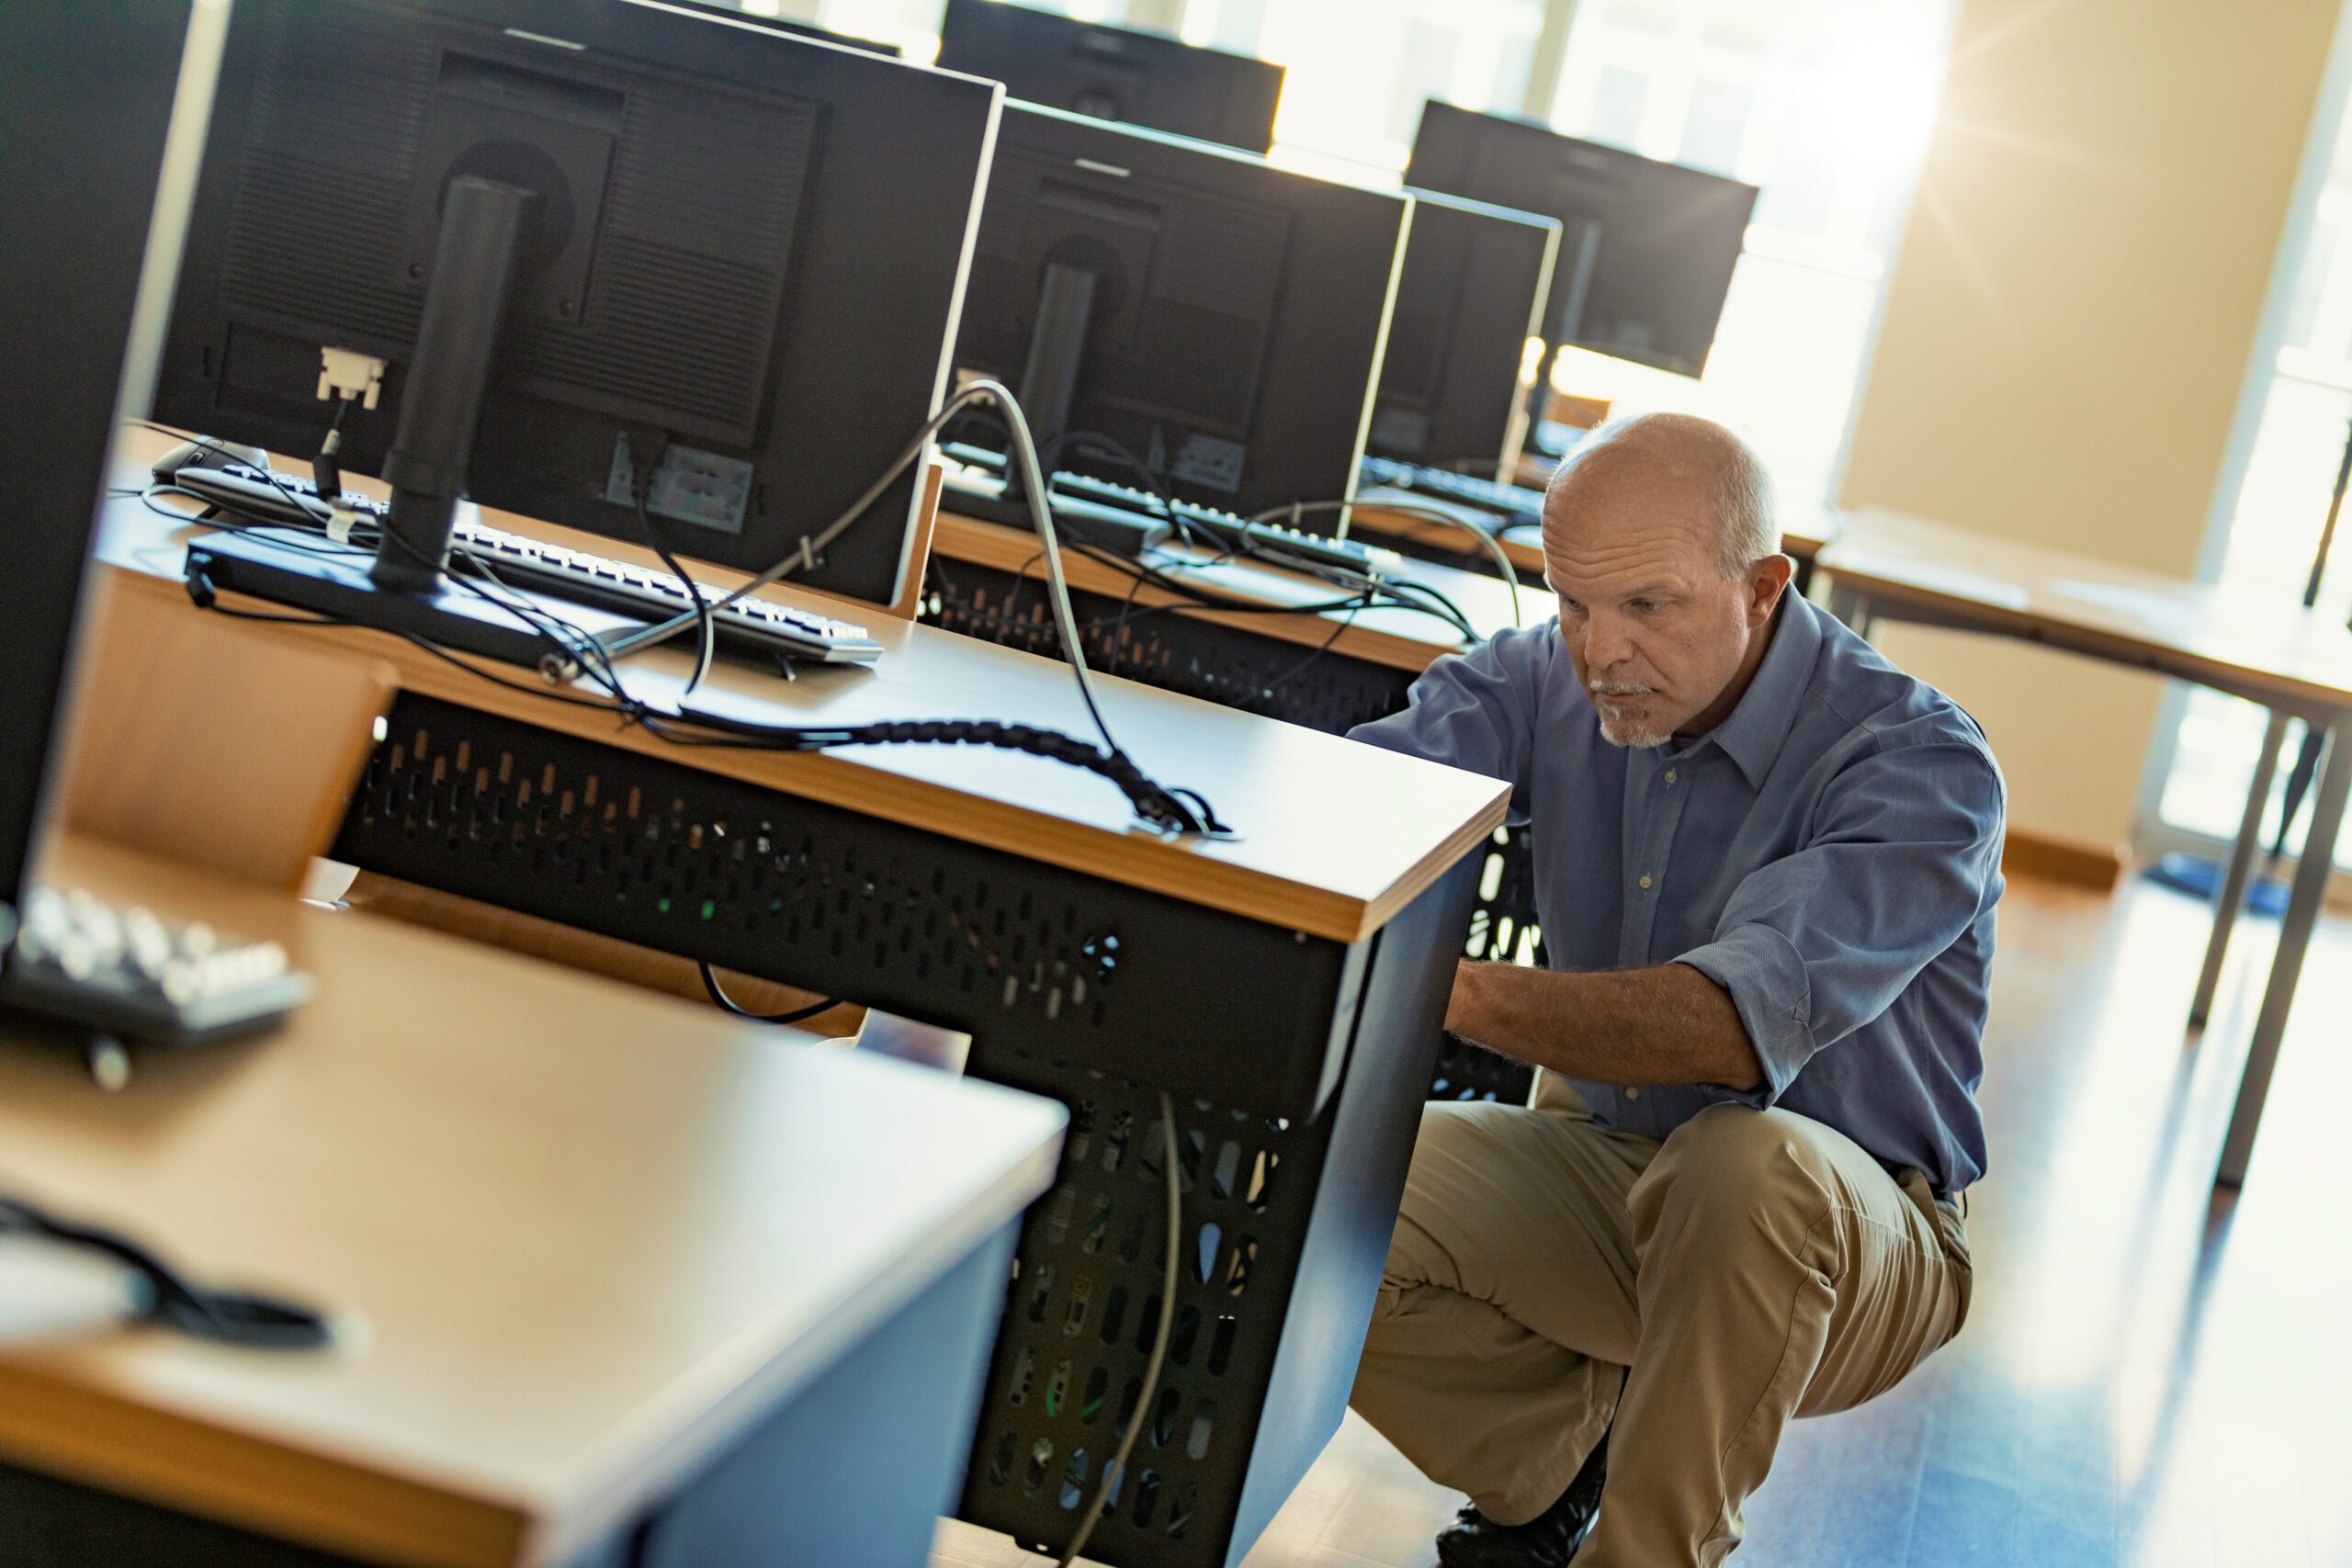 Senior Technician engaged in the physical maintenance of a desktop computer or workstation in a multi-person room, solving problems before they arise.